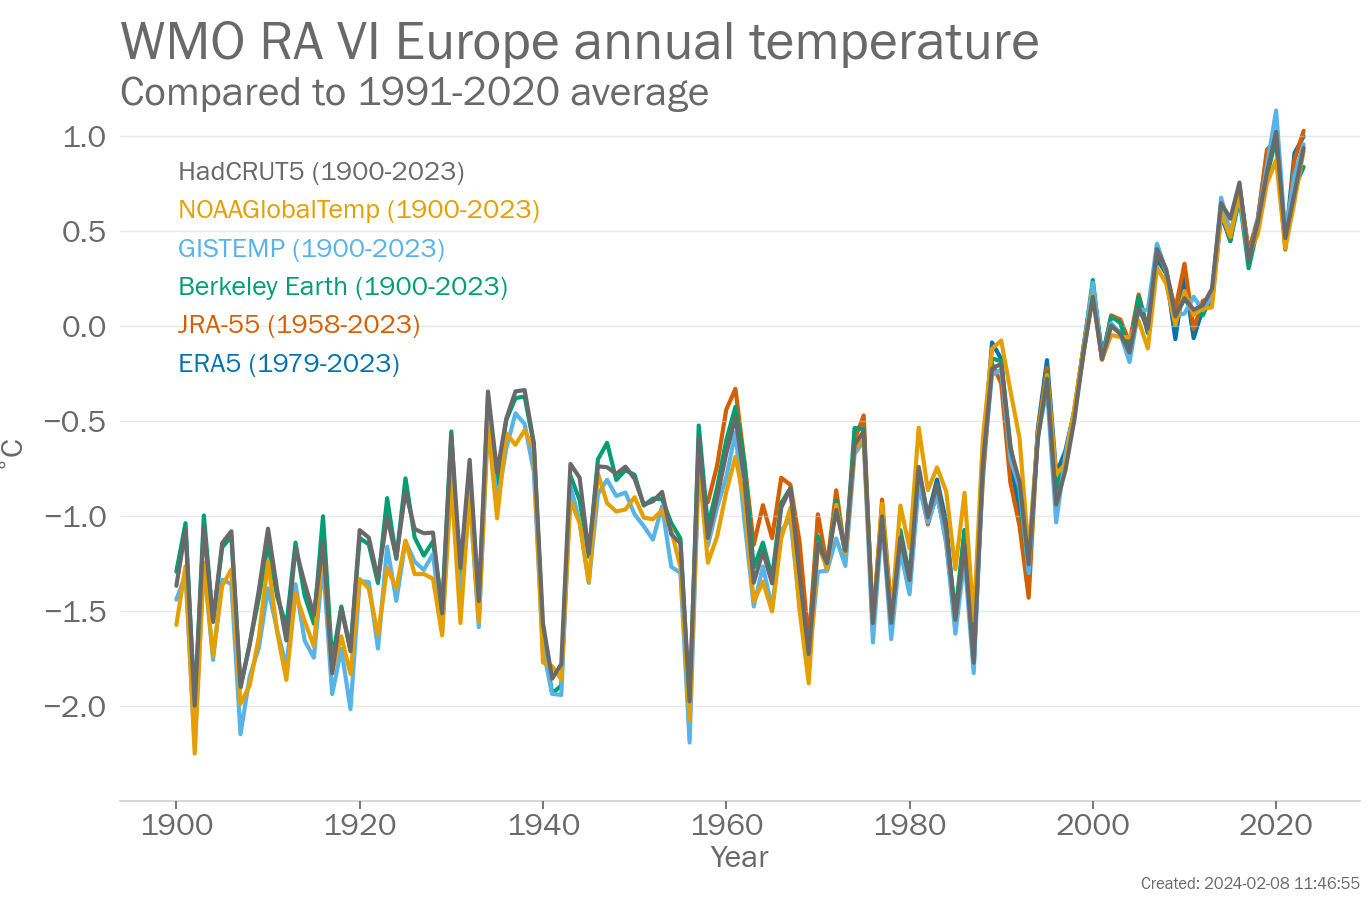 Annual Regional mean temperature for WMO RA 6 Europe (°C, difference from the 1991-2020 average)  from 1900-2023. Data are from the following six data sets: Berkeley Earth, ERA5, GISTEMP, HadCRUT5, JRA-55, NOAAGlobalTemp.